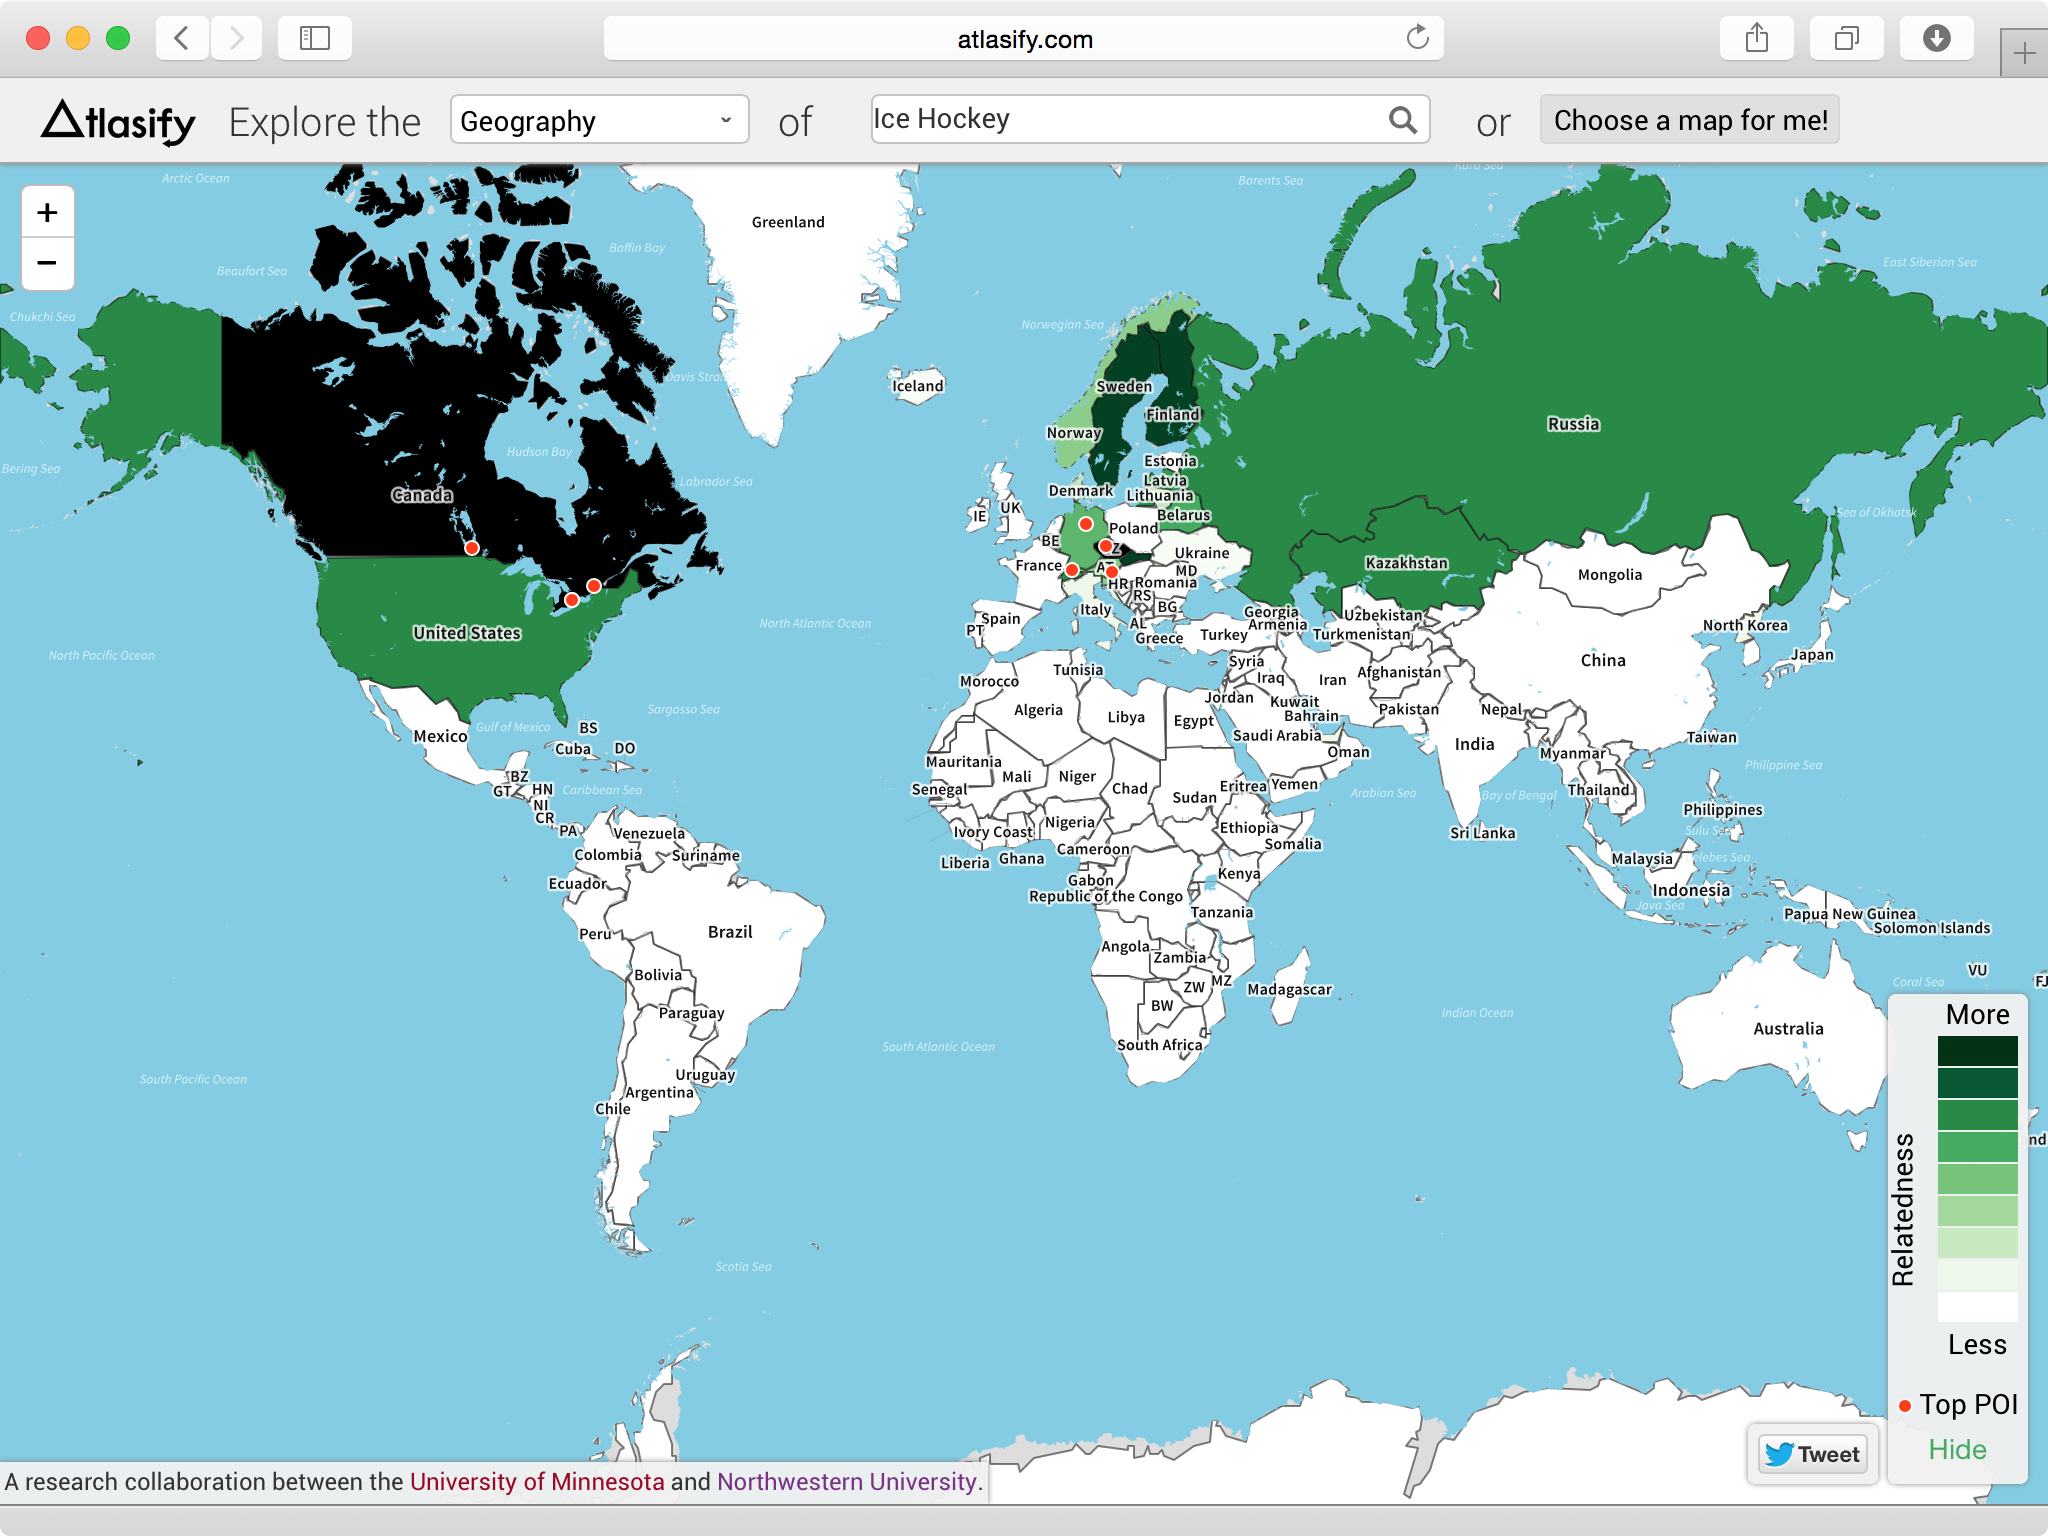 Atlasify's results for the query "Ice Hockey" on the world map reference system